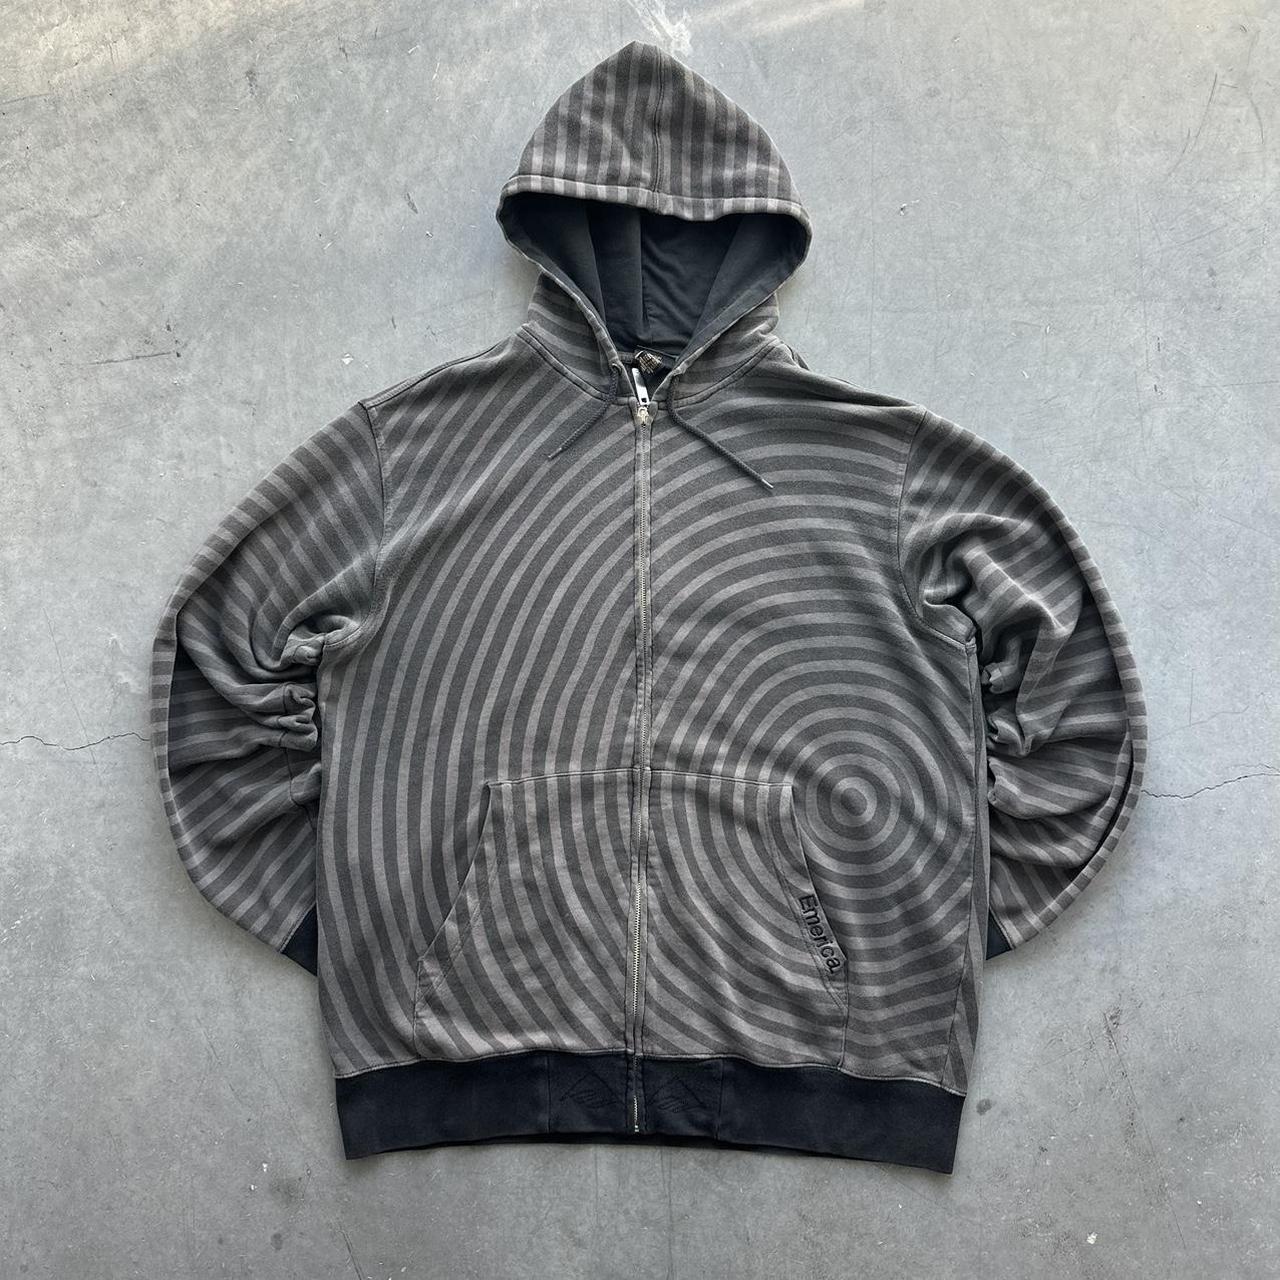 item listed by beamupvtg